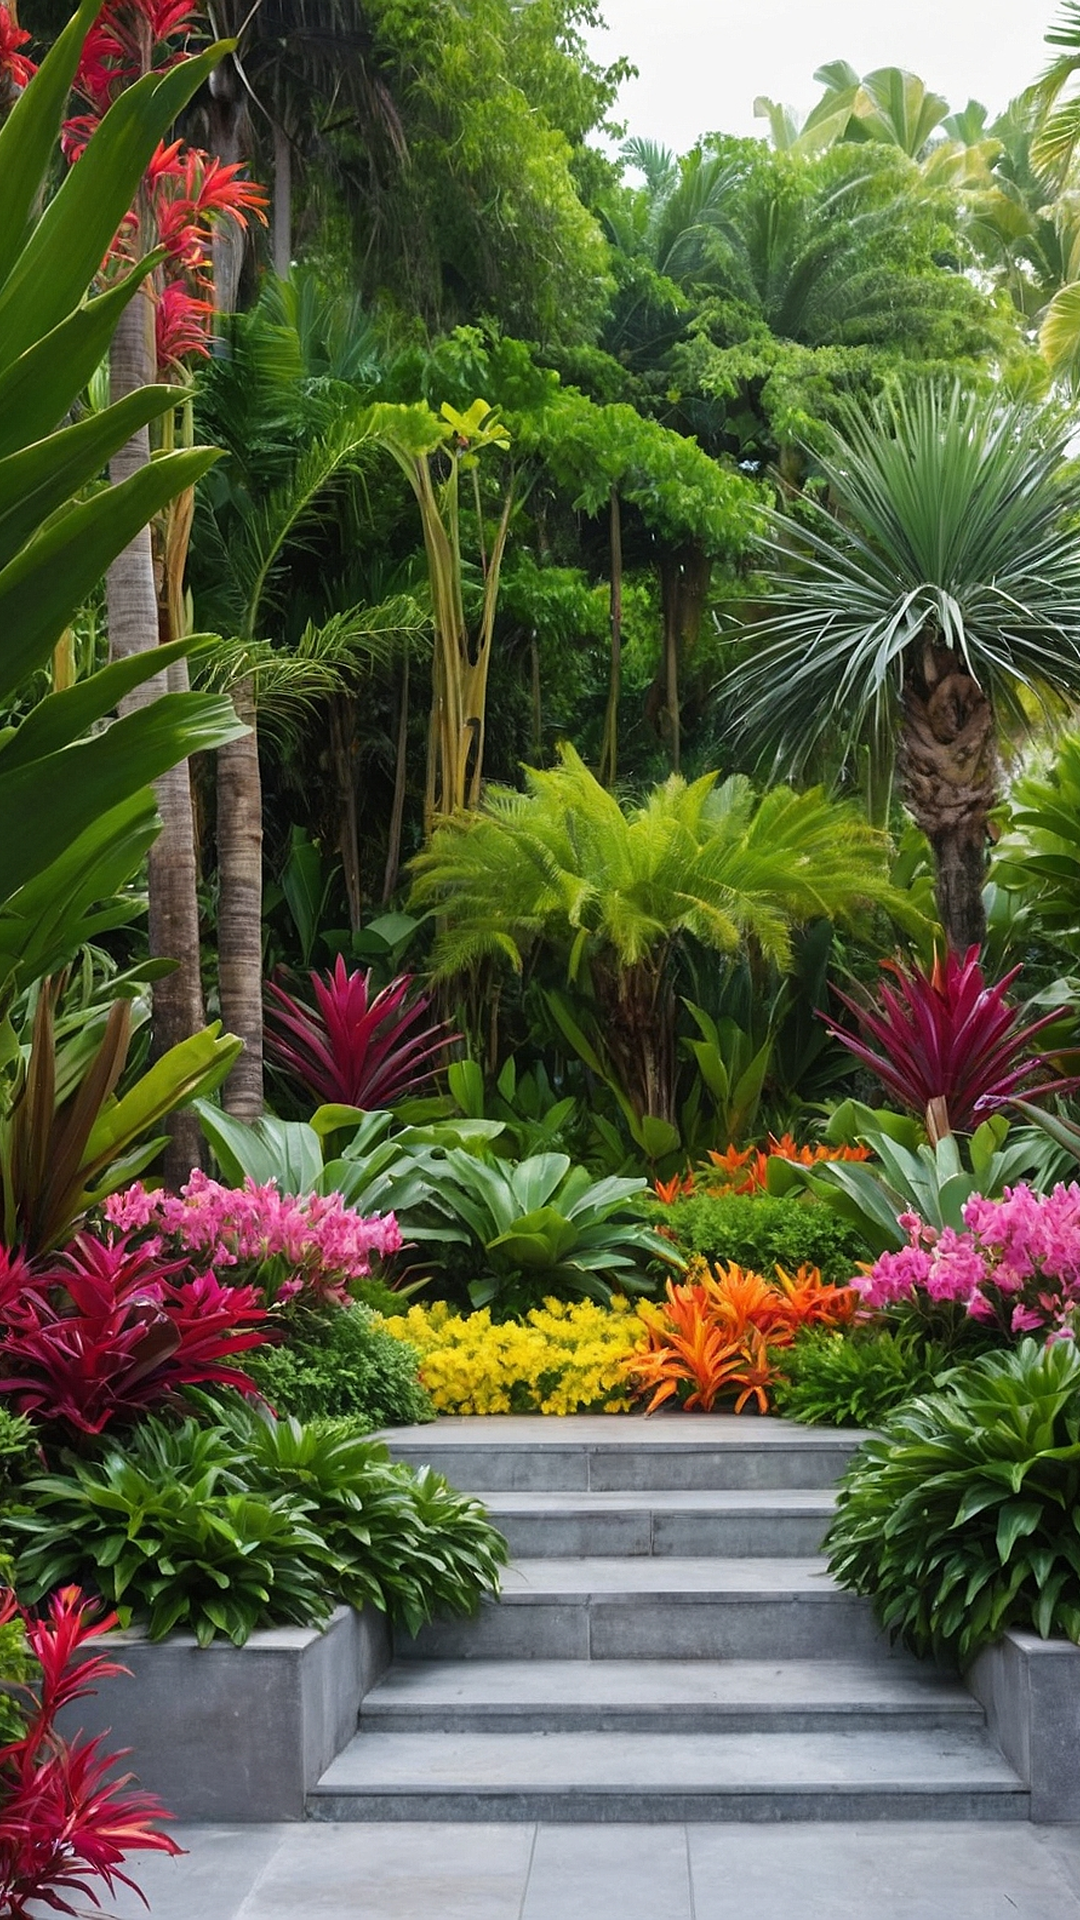 Coastal Charms: Tropical Landscaping Delights